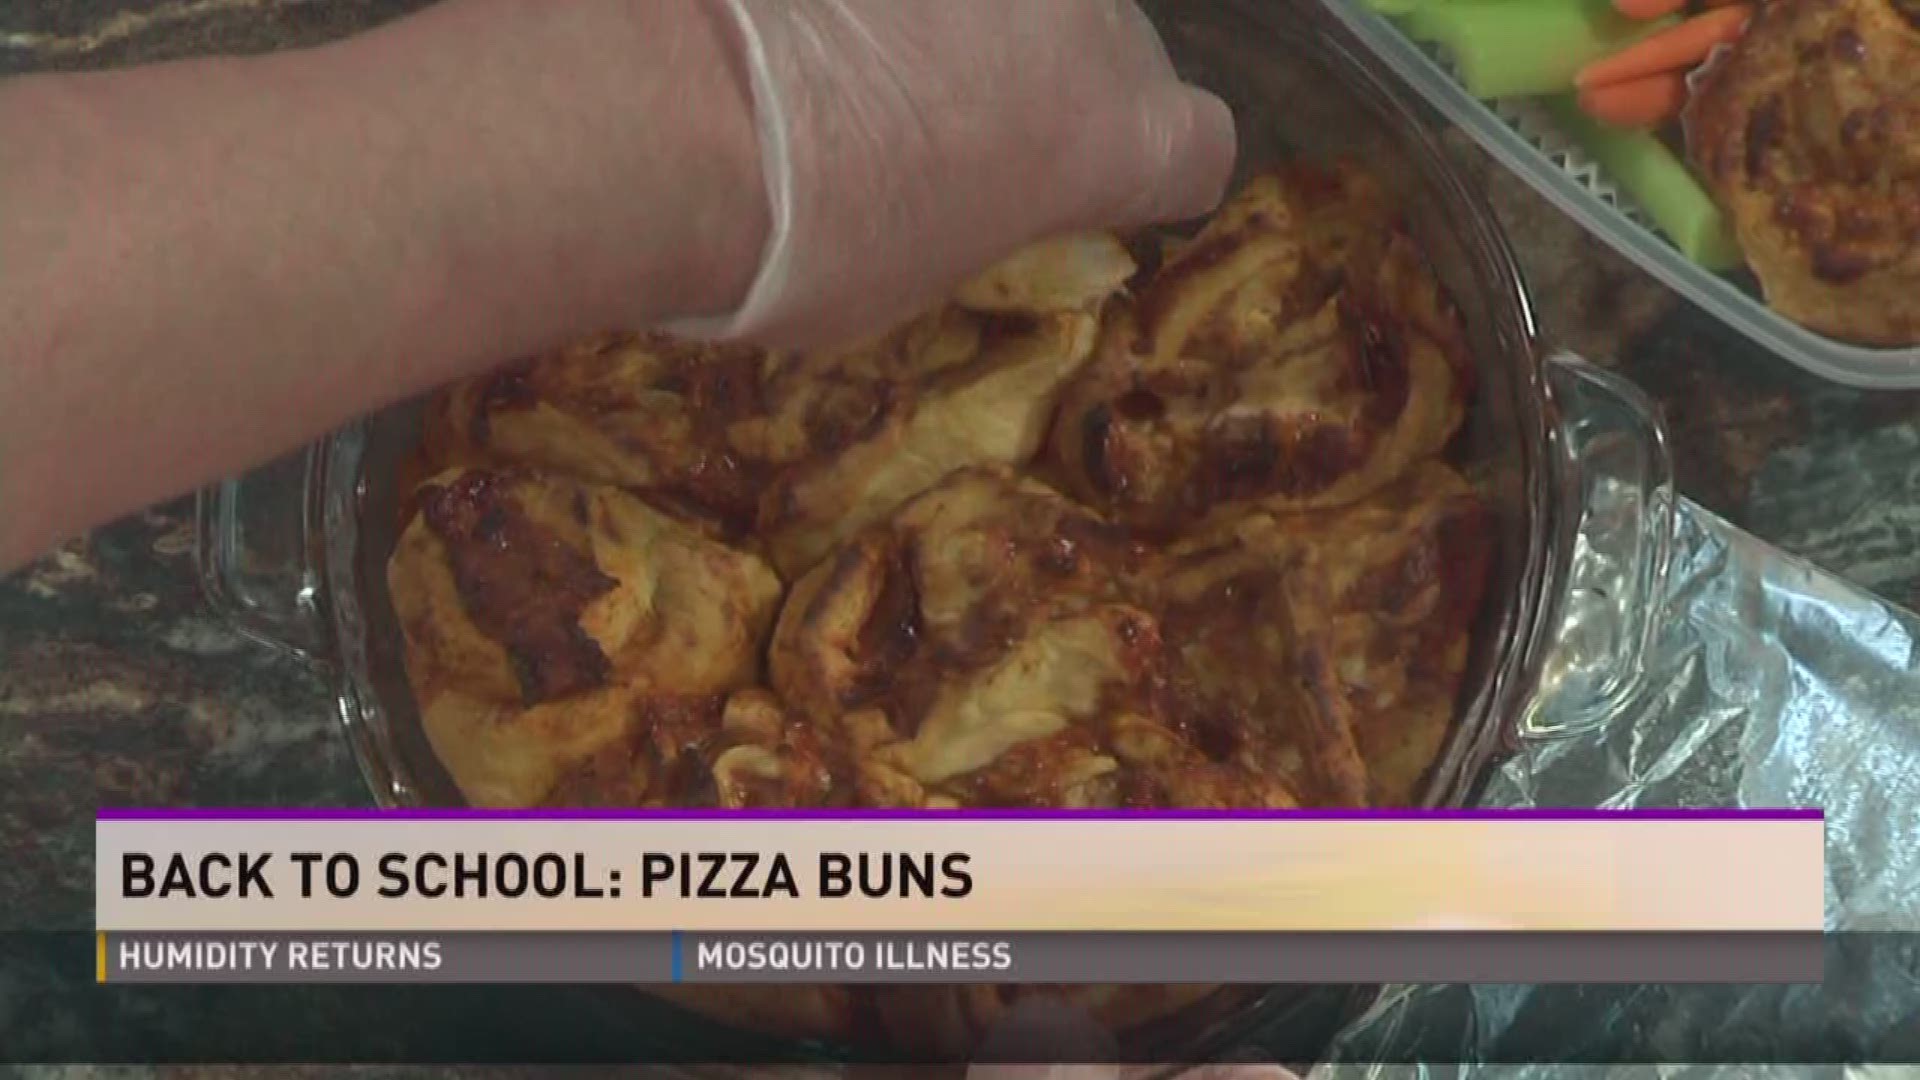 Bradford Catered Events makes pizza buns for back to school